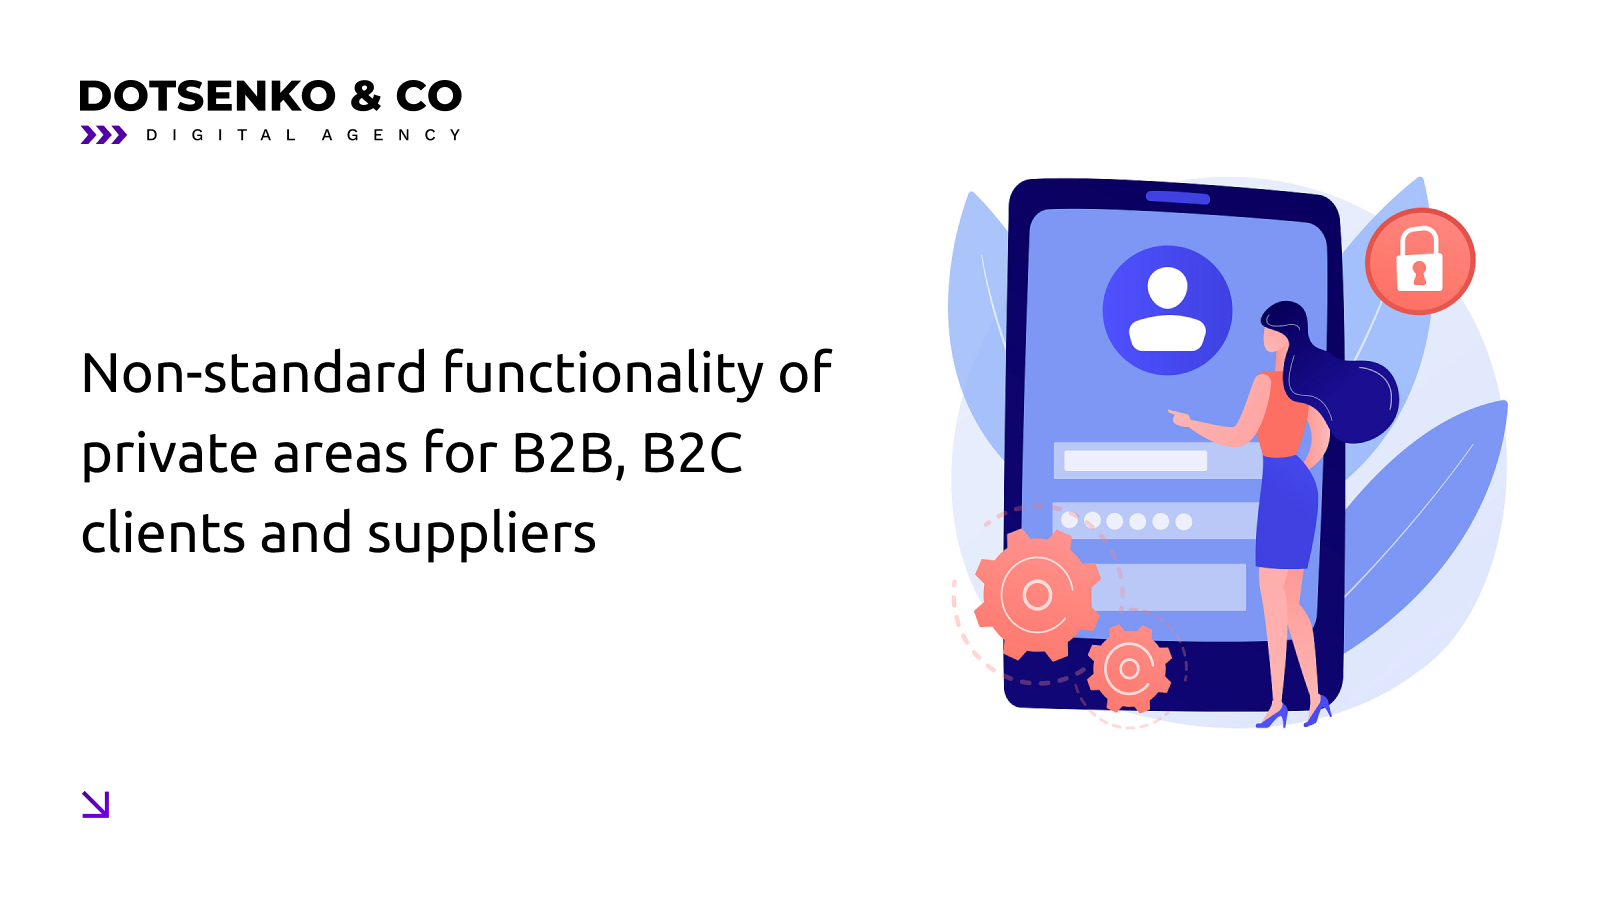 Non-standard functionality of private areas for B2B, B2C clients and suppliers